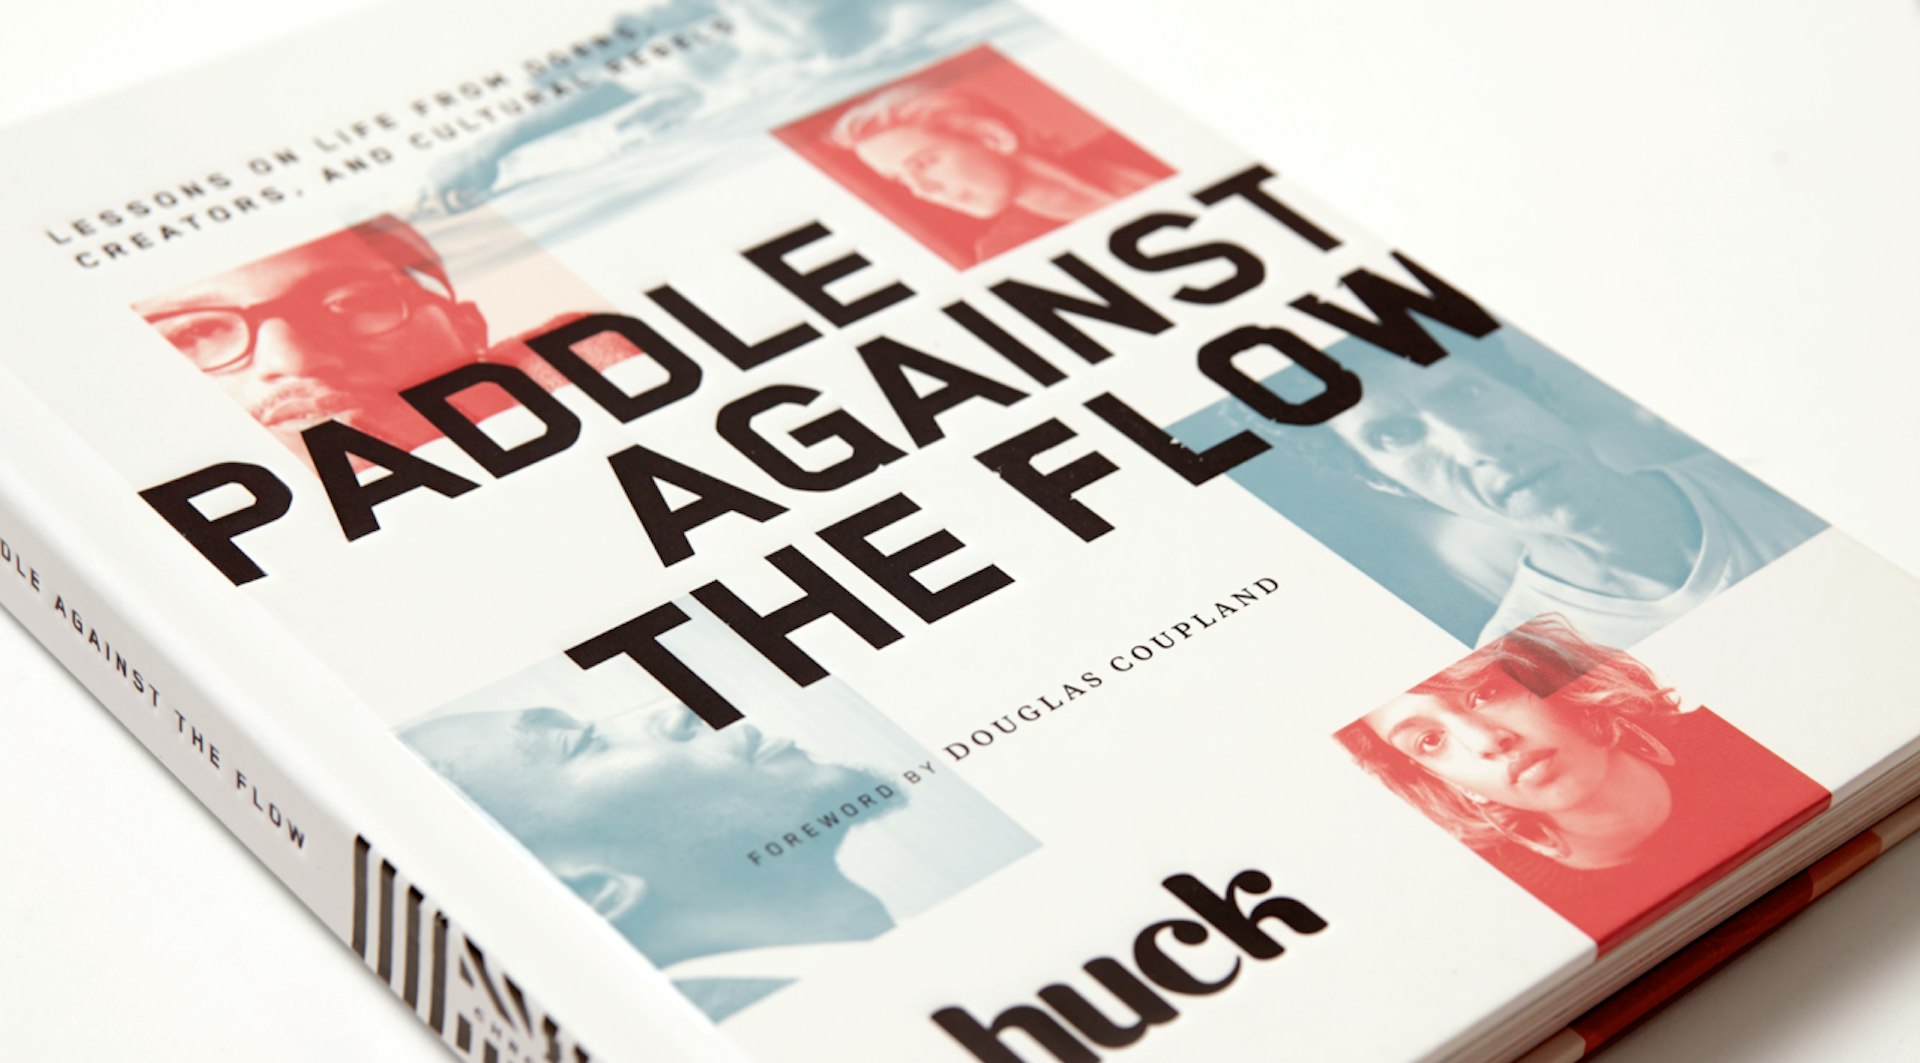 Huck releases first book Paddle Against the Flow